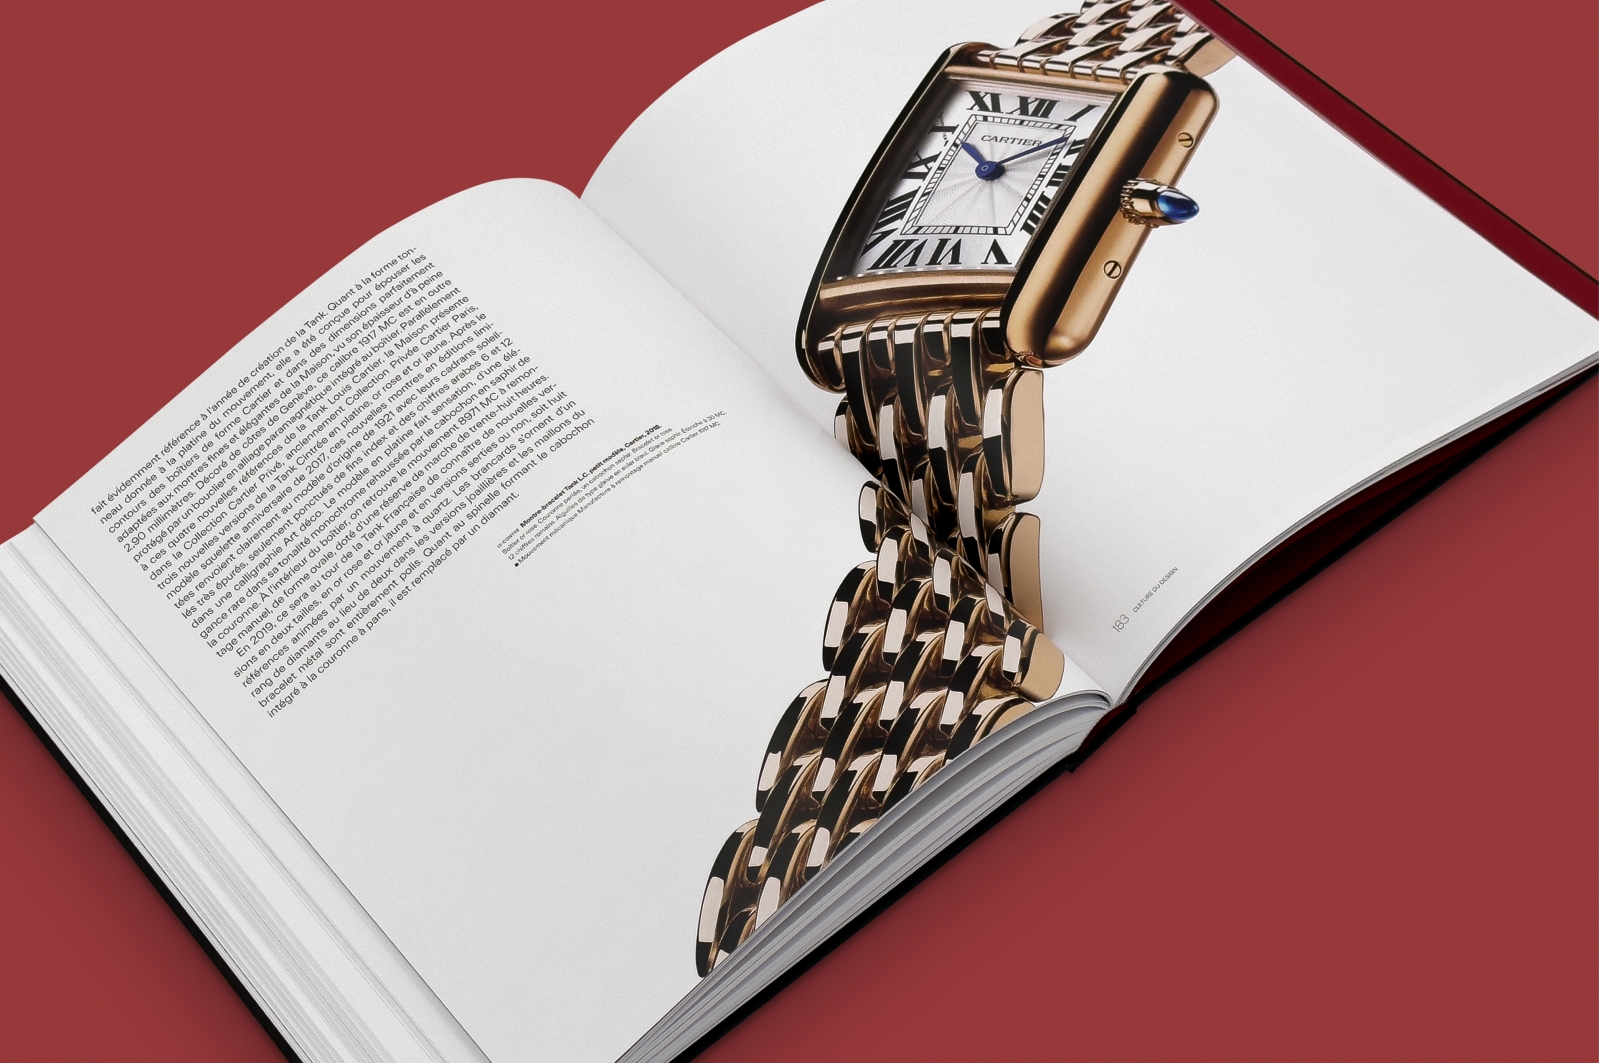 The Cartier Tank Watch 2022 edition